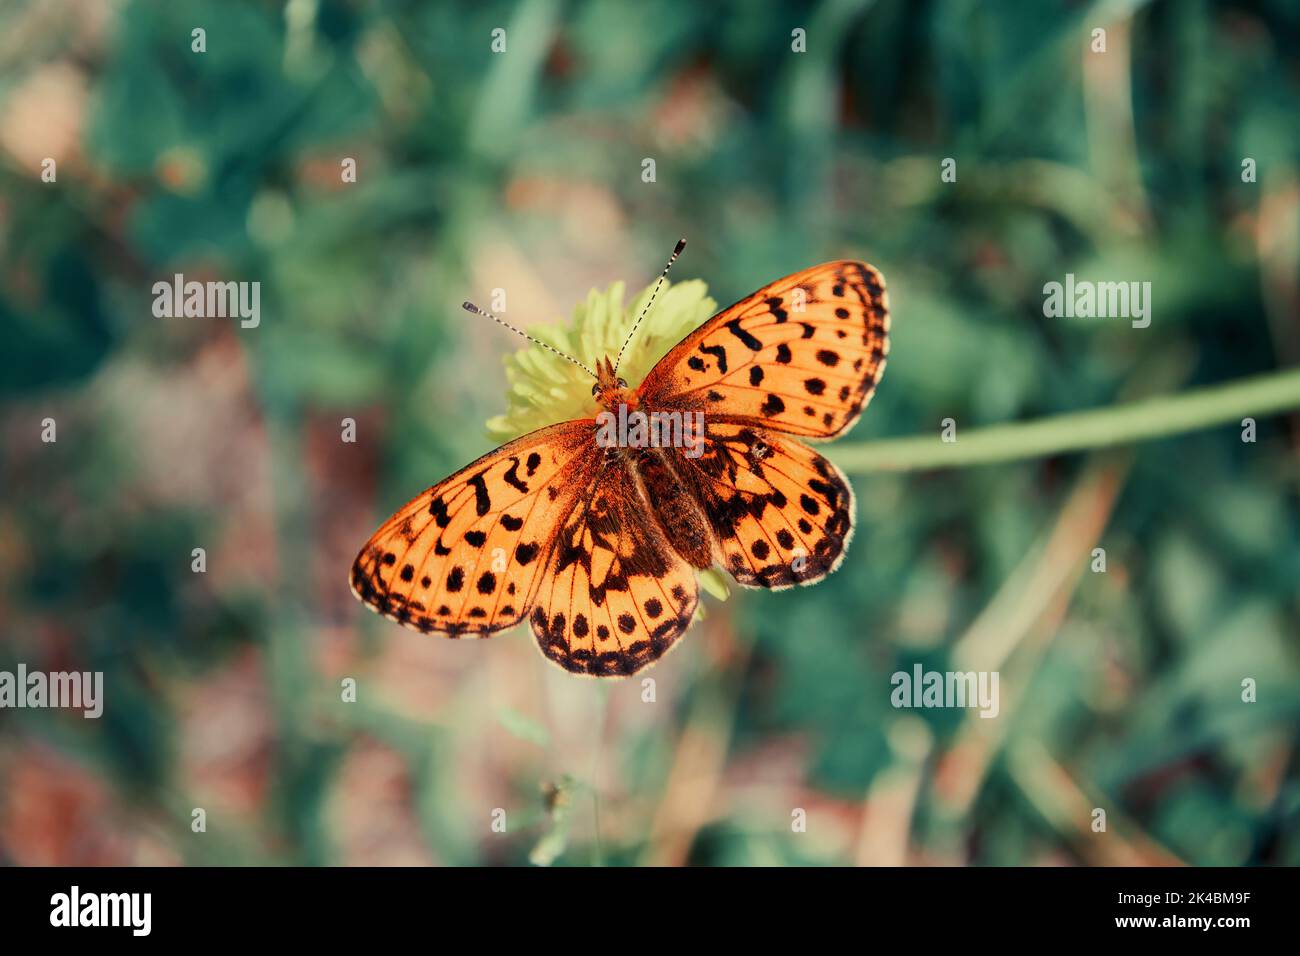 Orange butterfly on the flower above blue and green grass. Toned animals and nature image Stock Photo